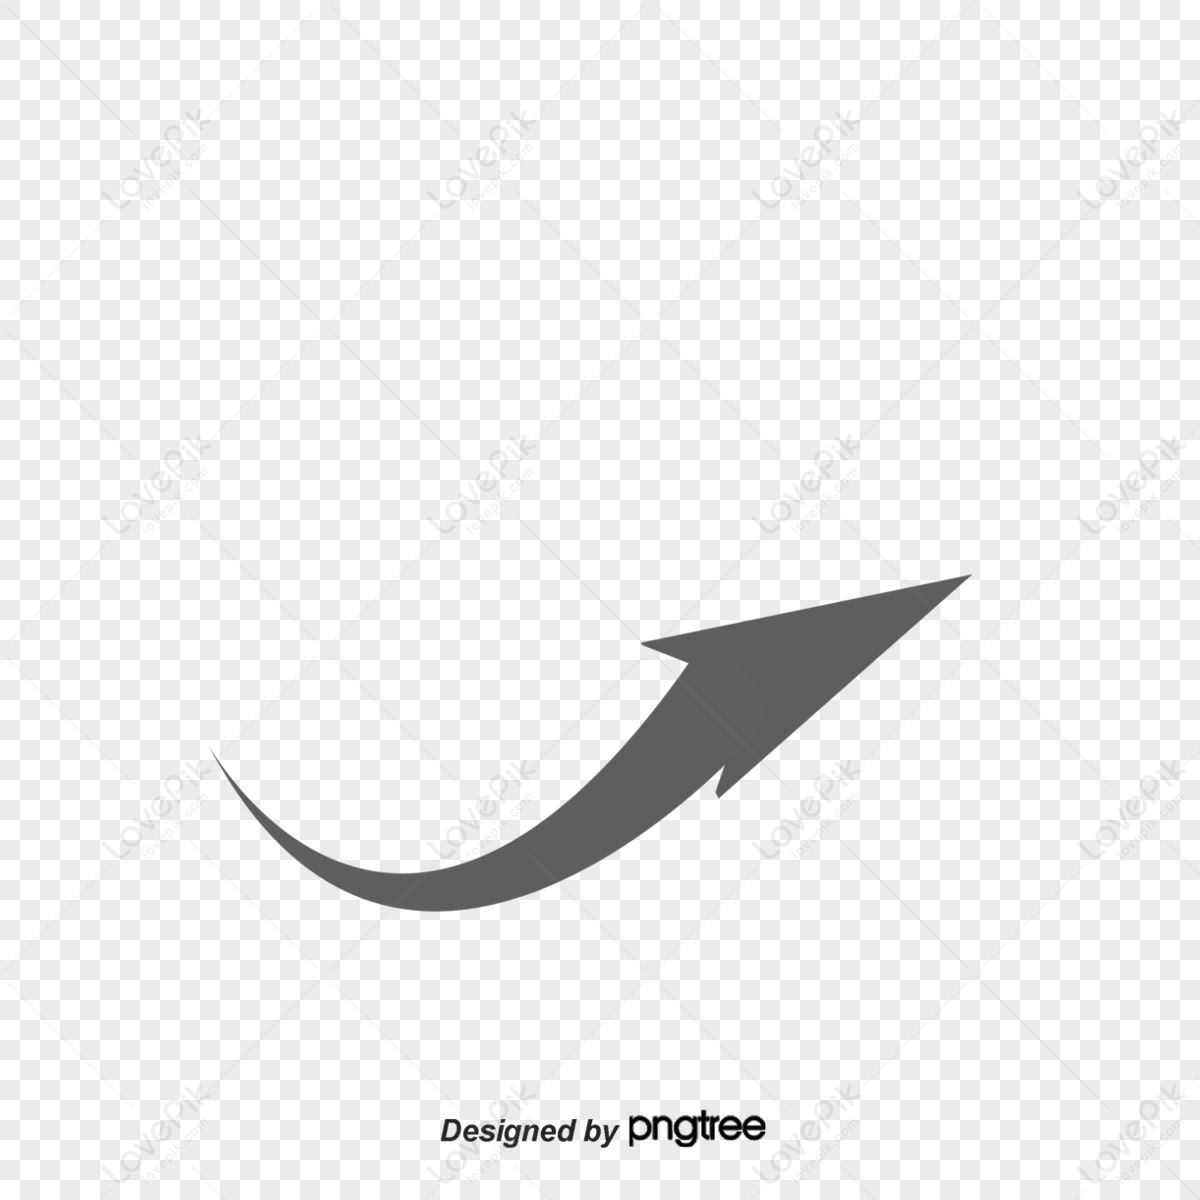 Arc Arrowblack Arrowdotted Arrowscurved Arrow Png Free Download And Clipart Image For Free 2962